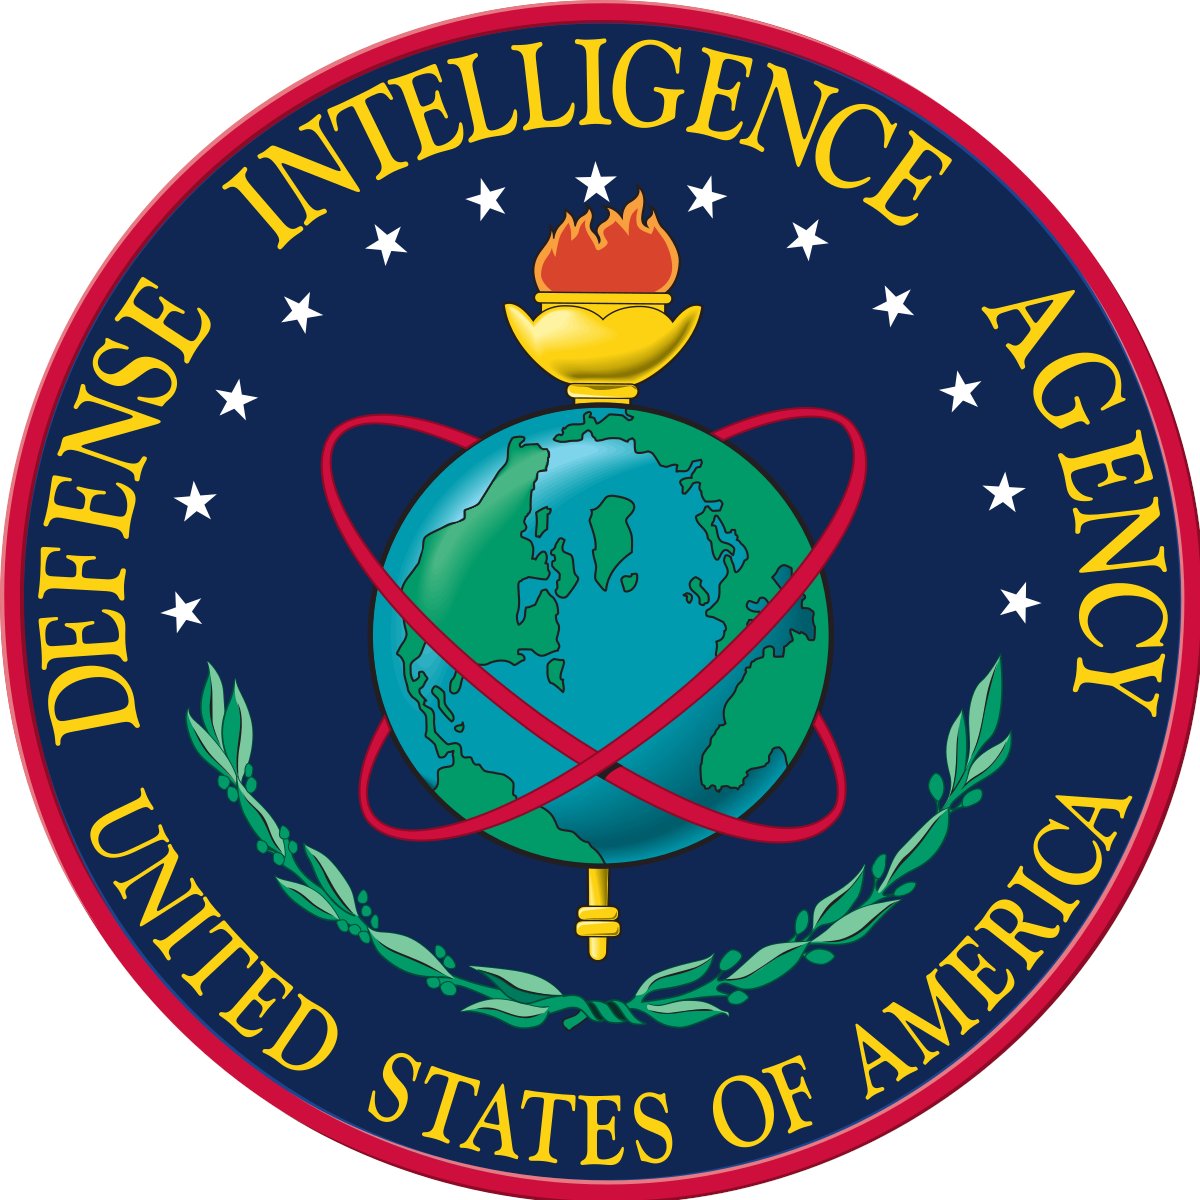 Looking forward to guest lecturing on Russian disinformation at the Defense Intelligence Agency (#DIA) tomorrow!